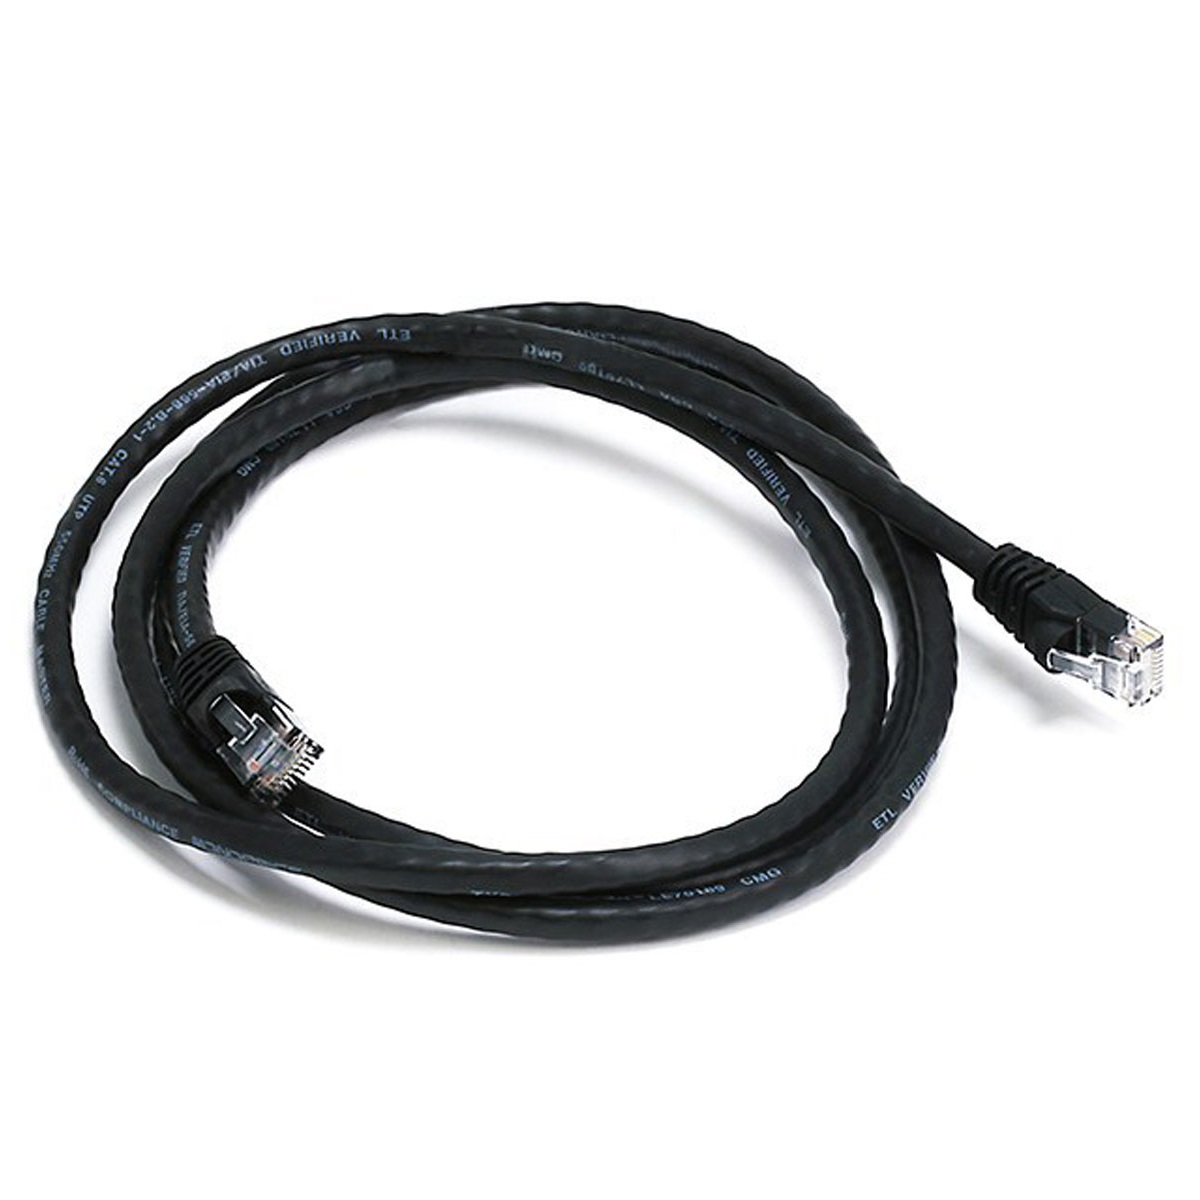 View 1m Ethernet/network Cable - Cross Over